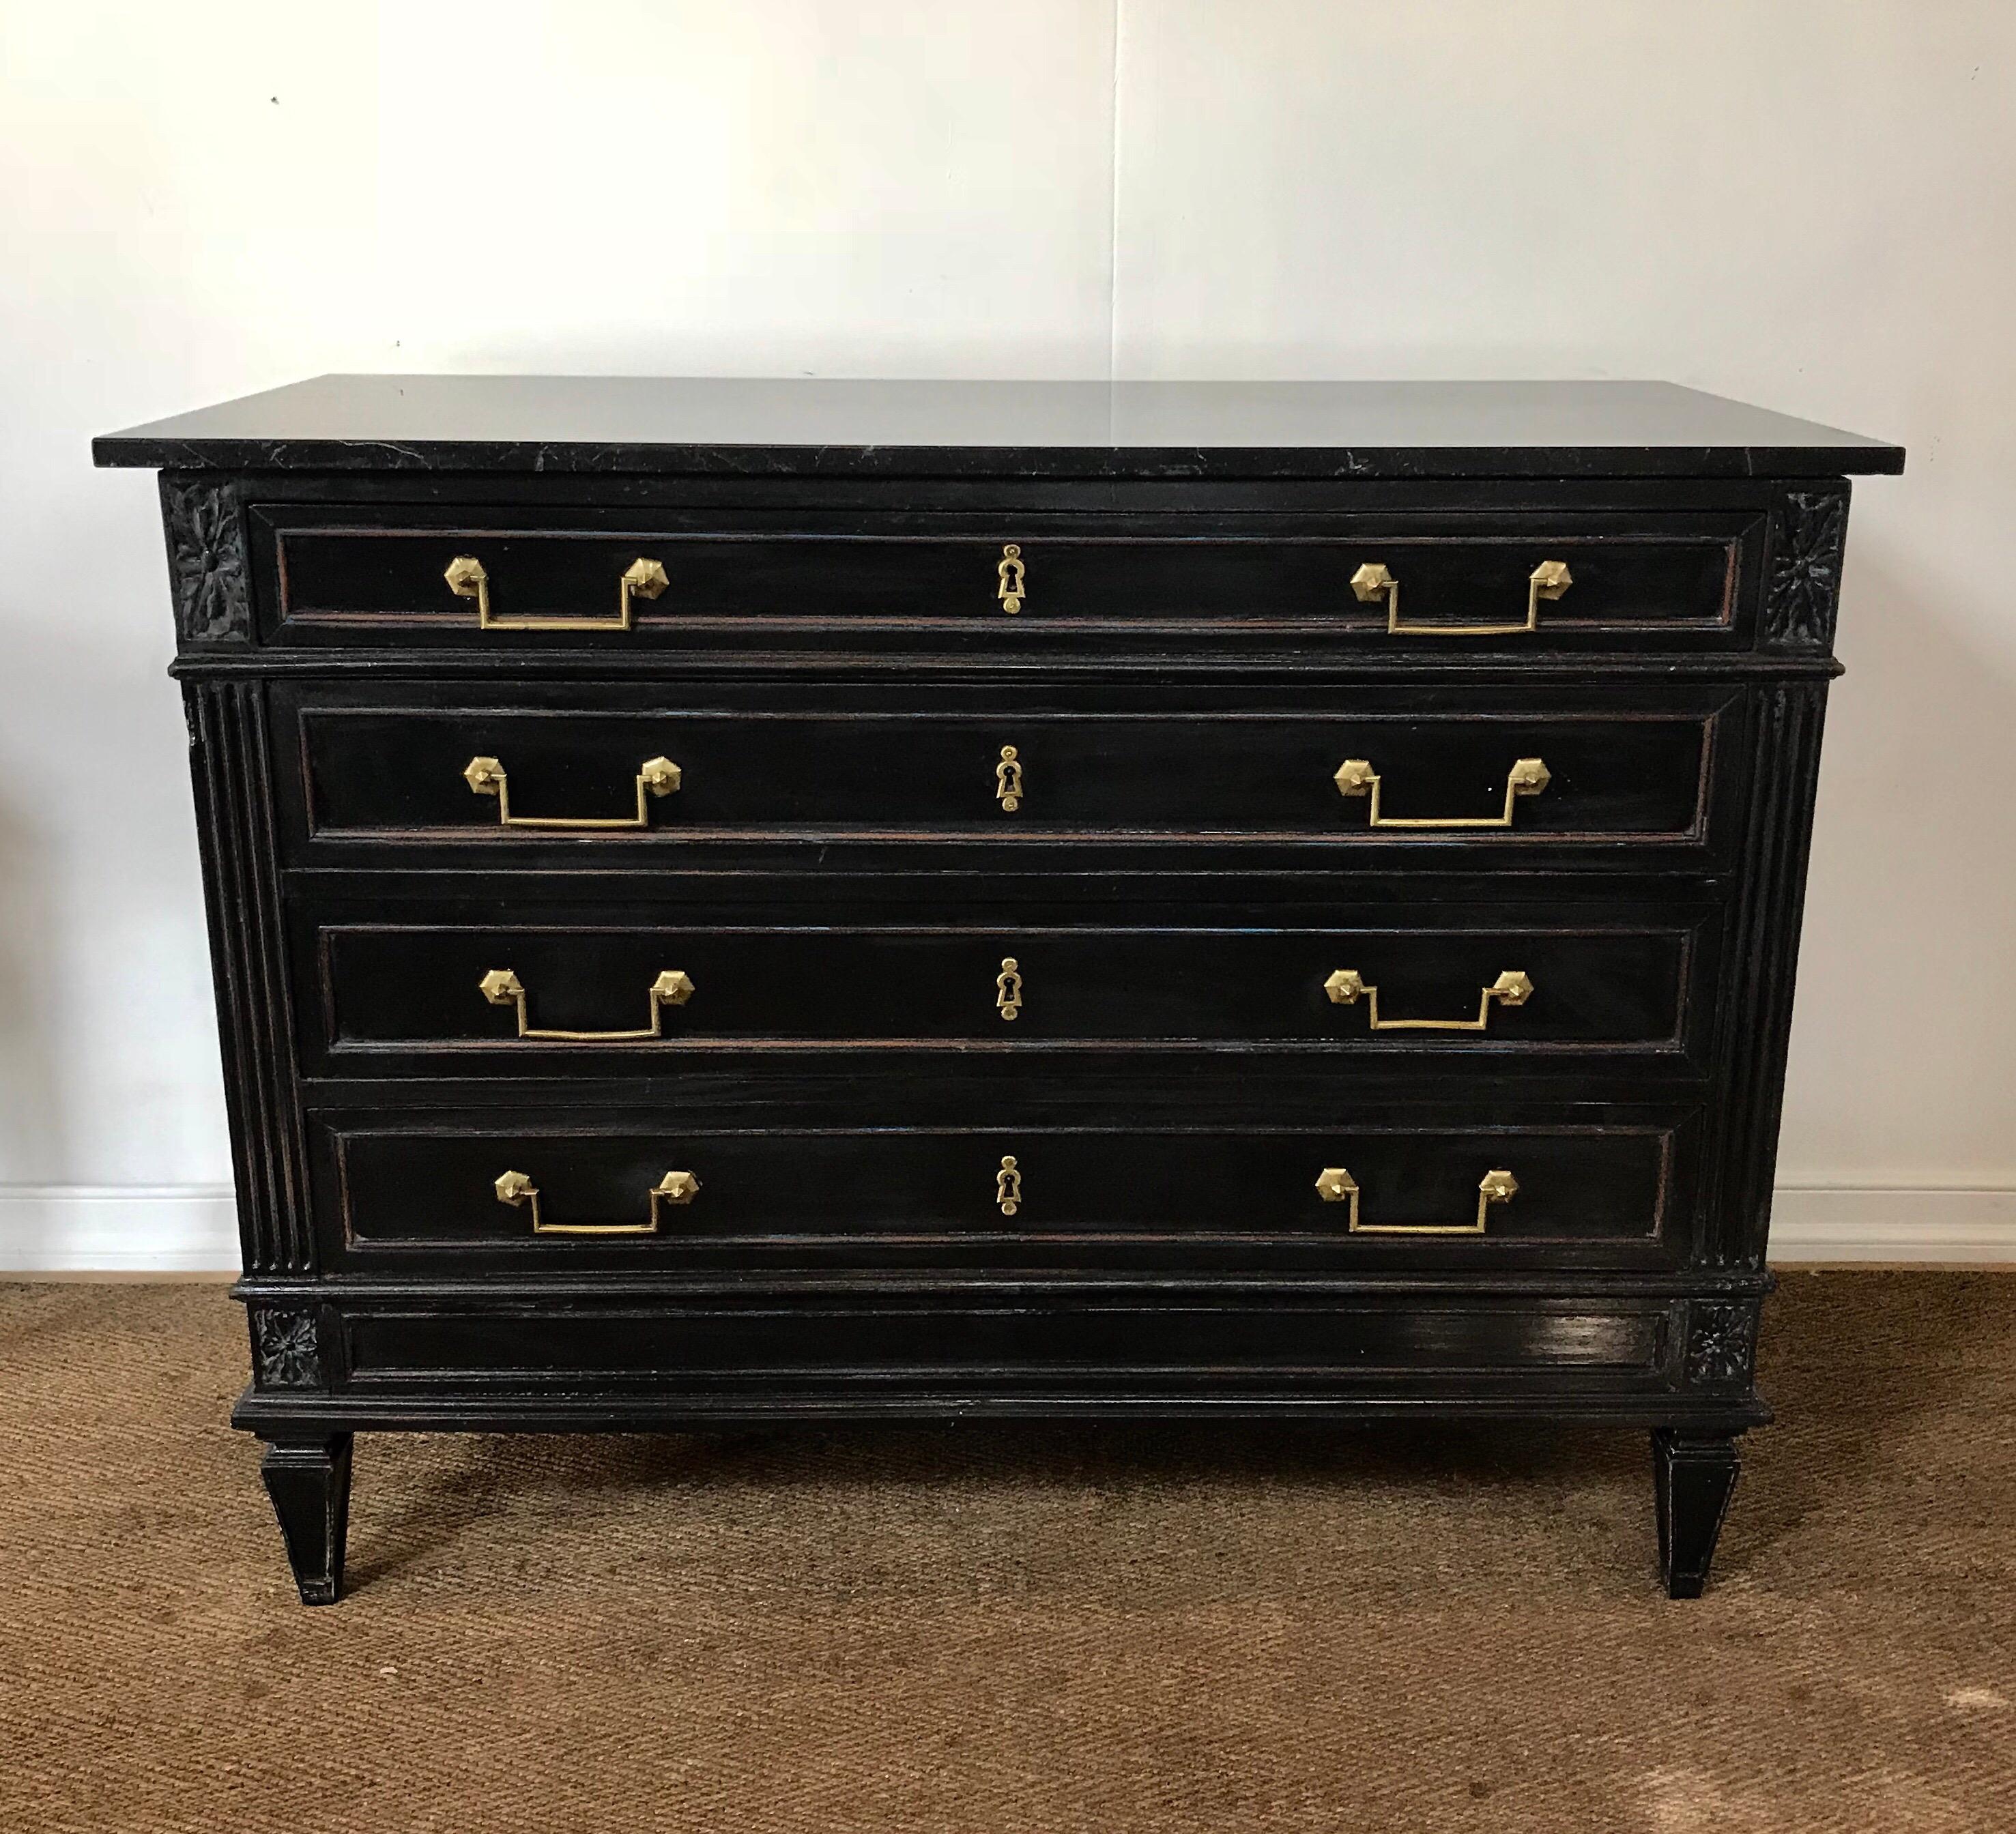 A late 19th century Louis XVI styled marble top commode having a rustic and dusty black ebonized finish complemented by high quality and original brass pulls. The four drawer chest supports a dark charcoal gray granite top which is secondary to the